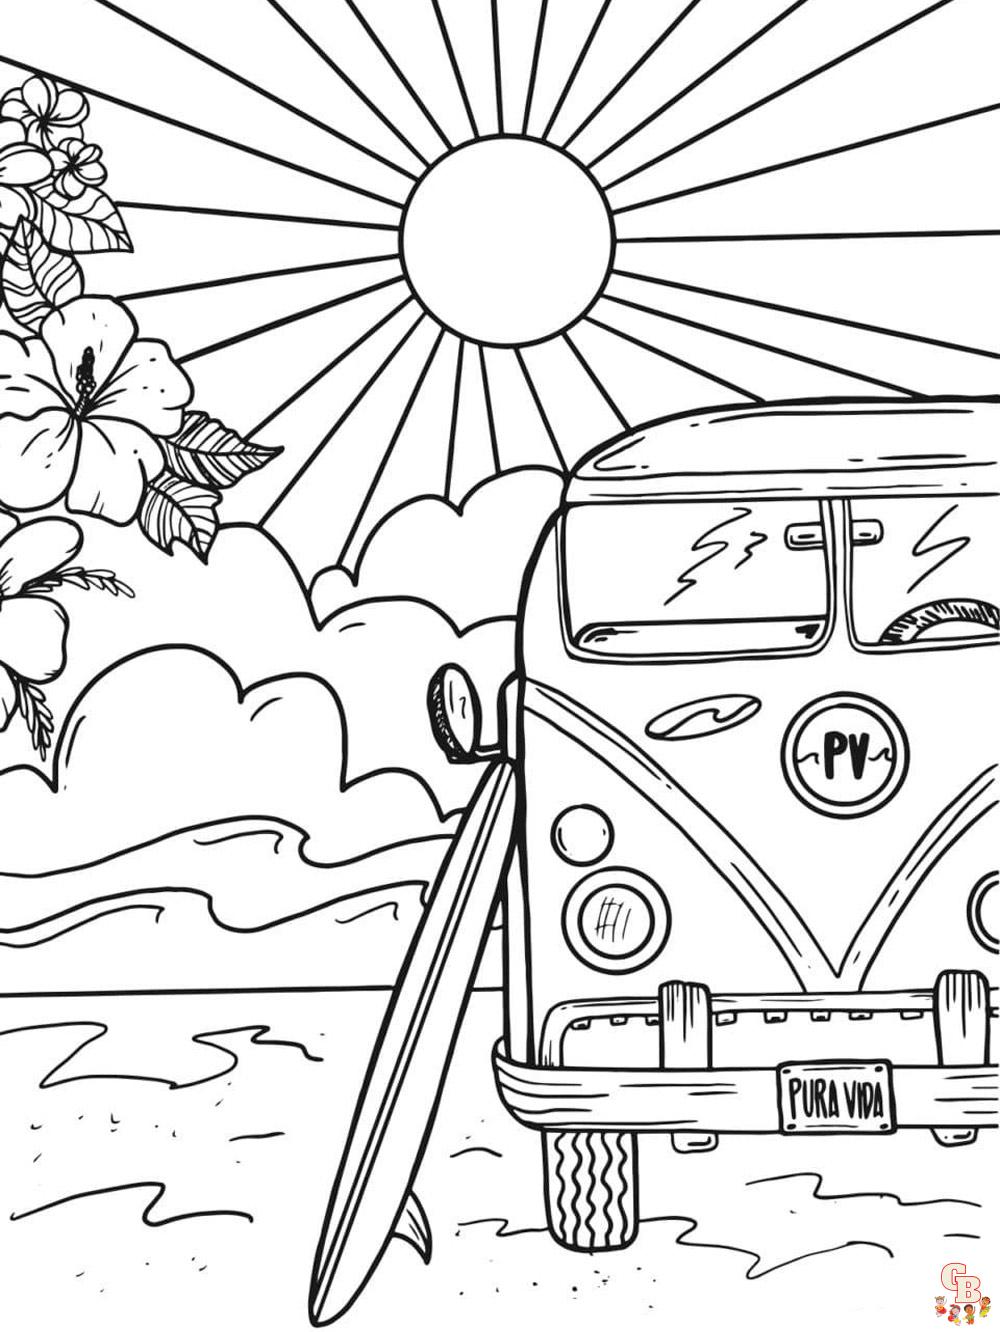 Aesthetic Coloring Pages 7